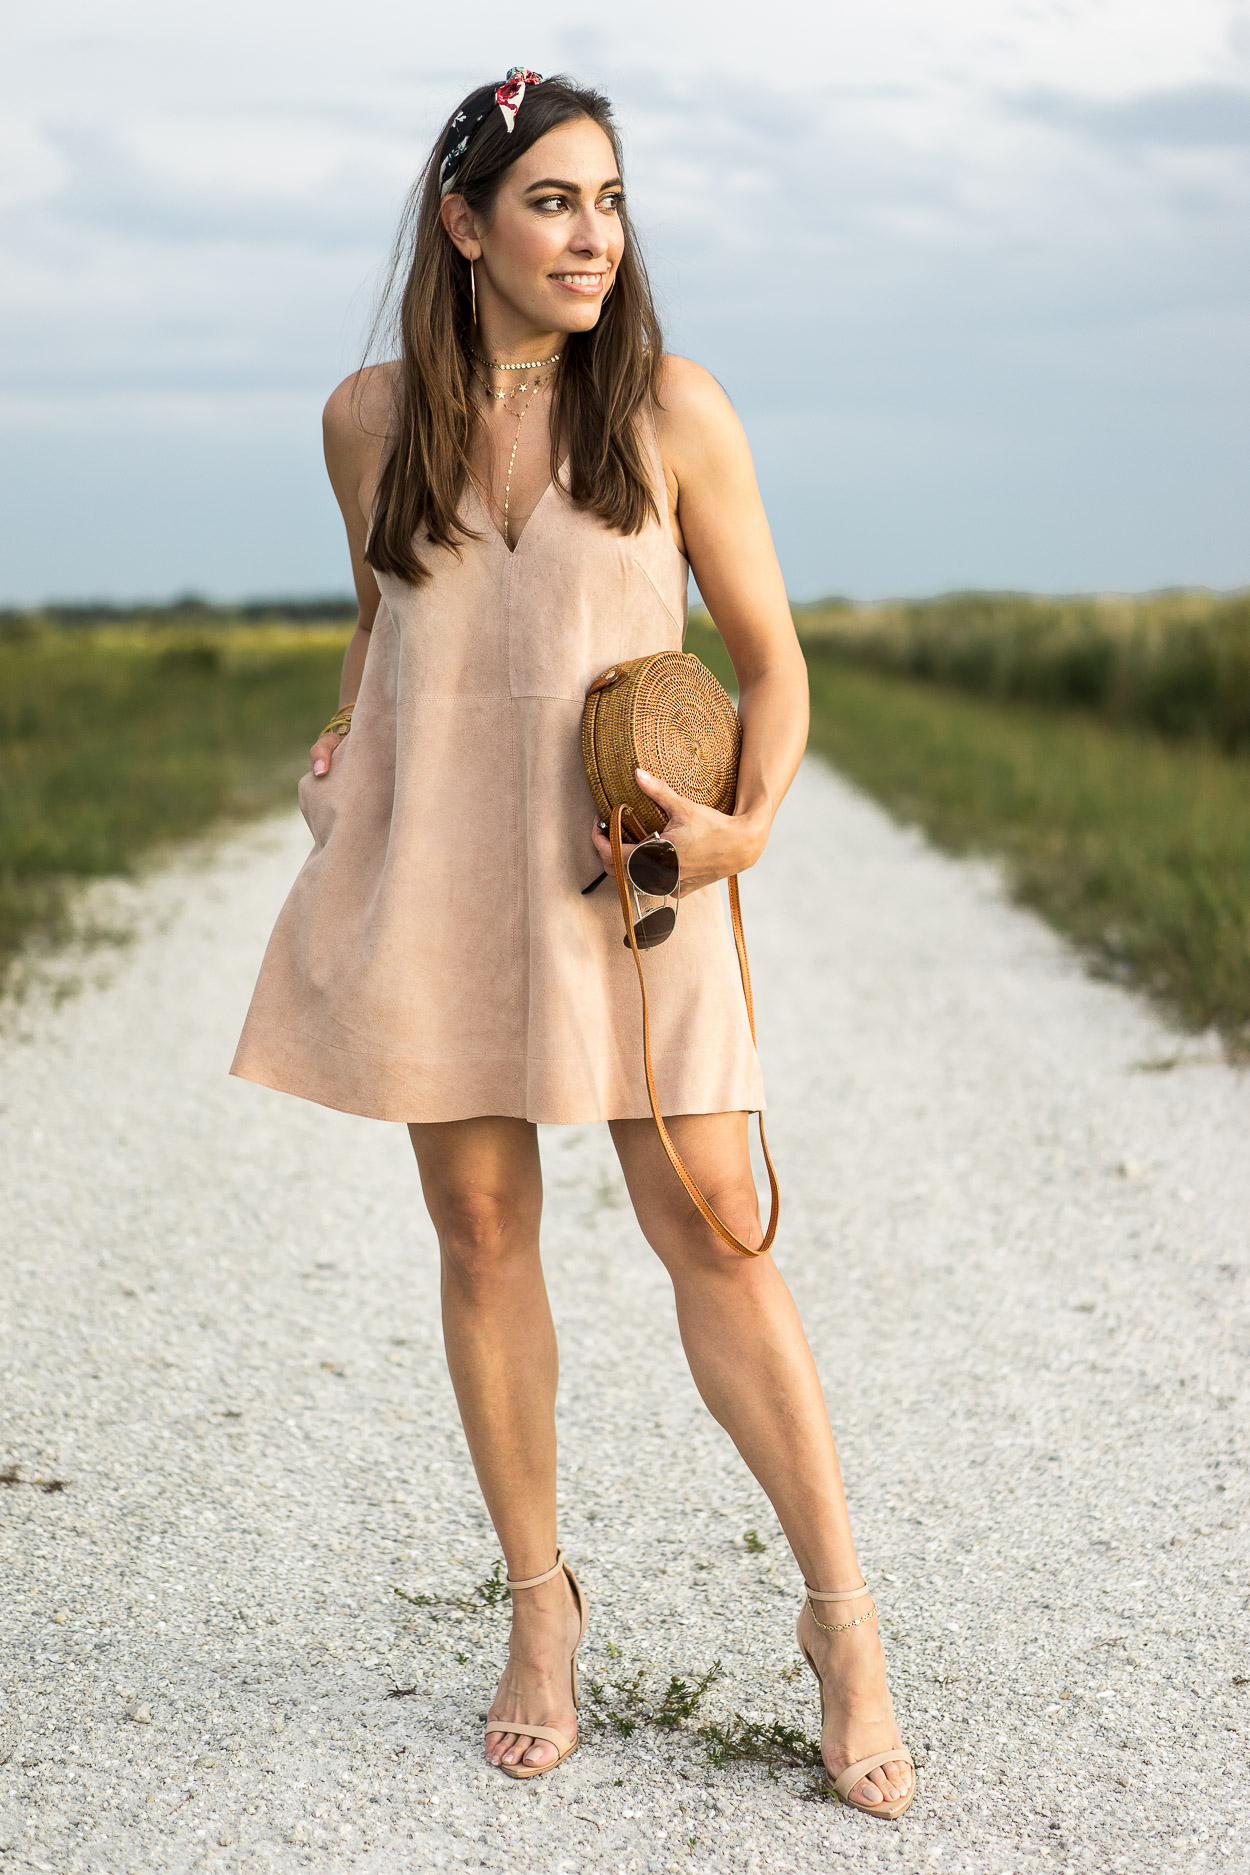 Blush suede dress by Free People for Summer style